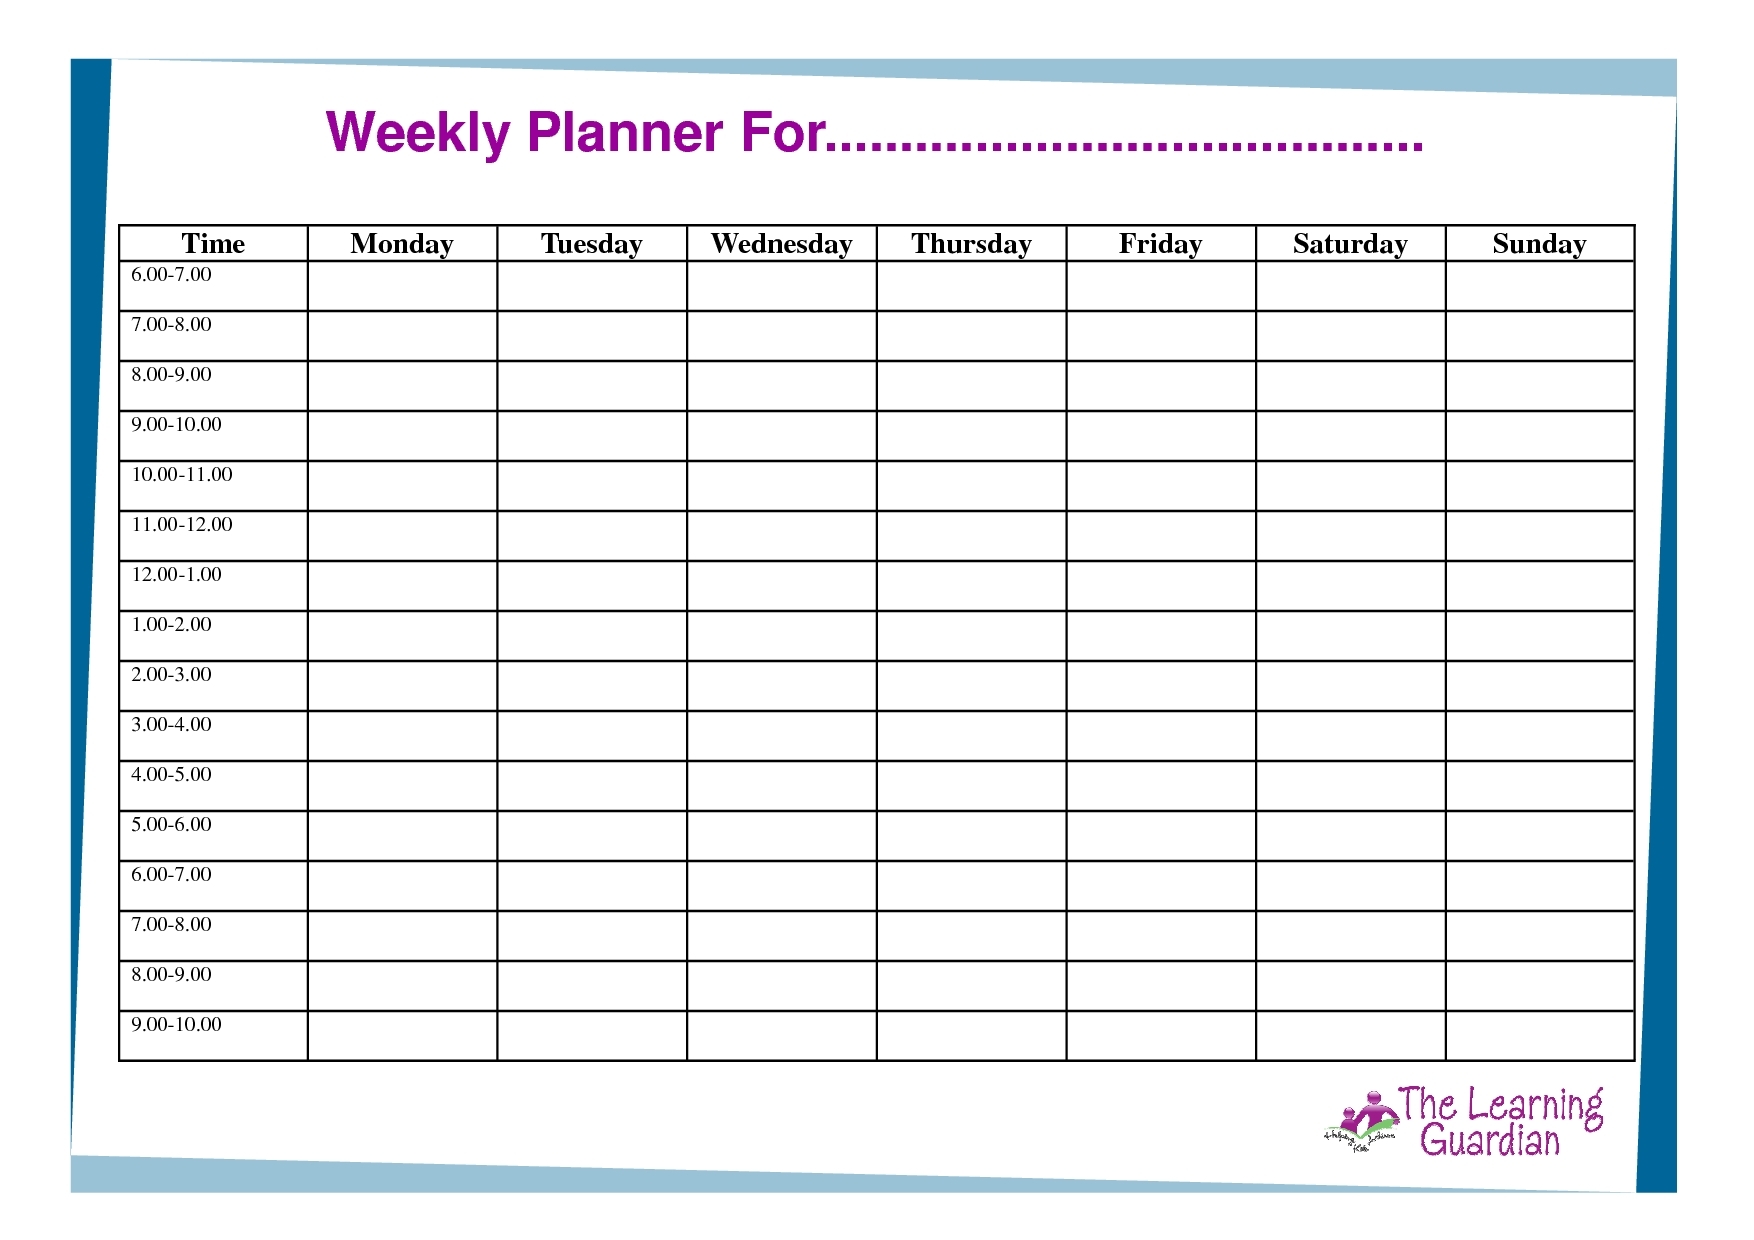 Free Printable Weekly Calendar Templates Planner For Time Schedule throughout Free Printable Blank Weekly Calendar Templates